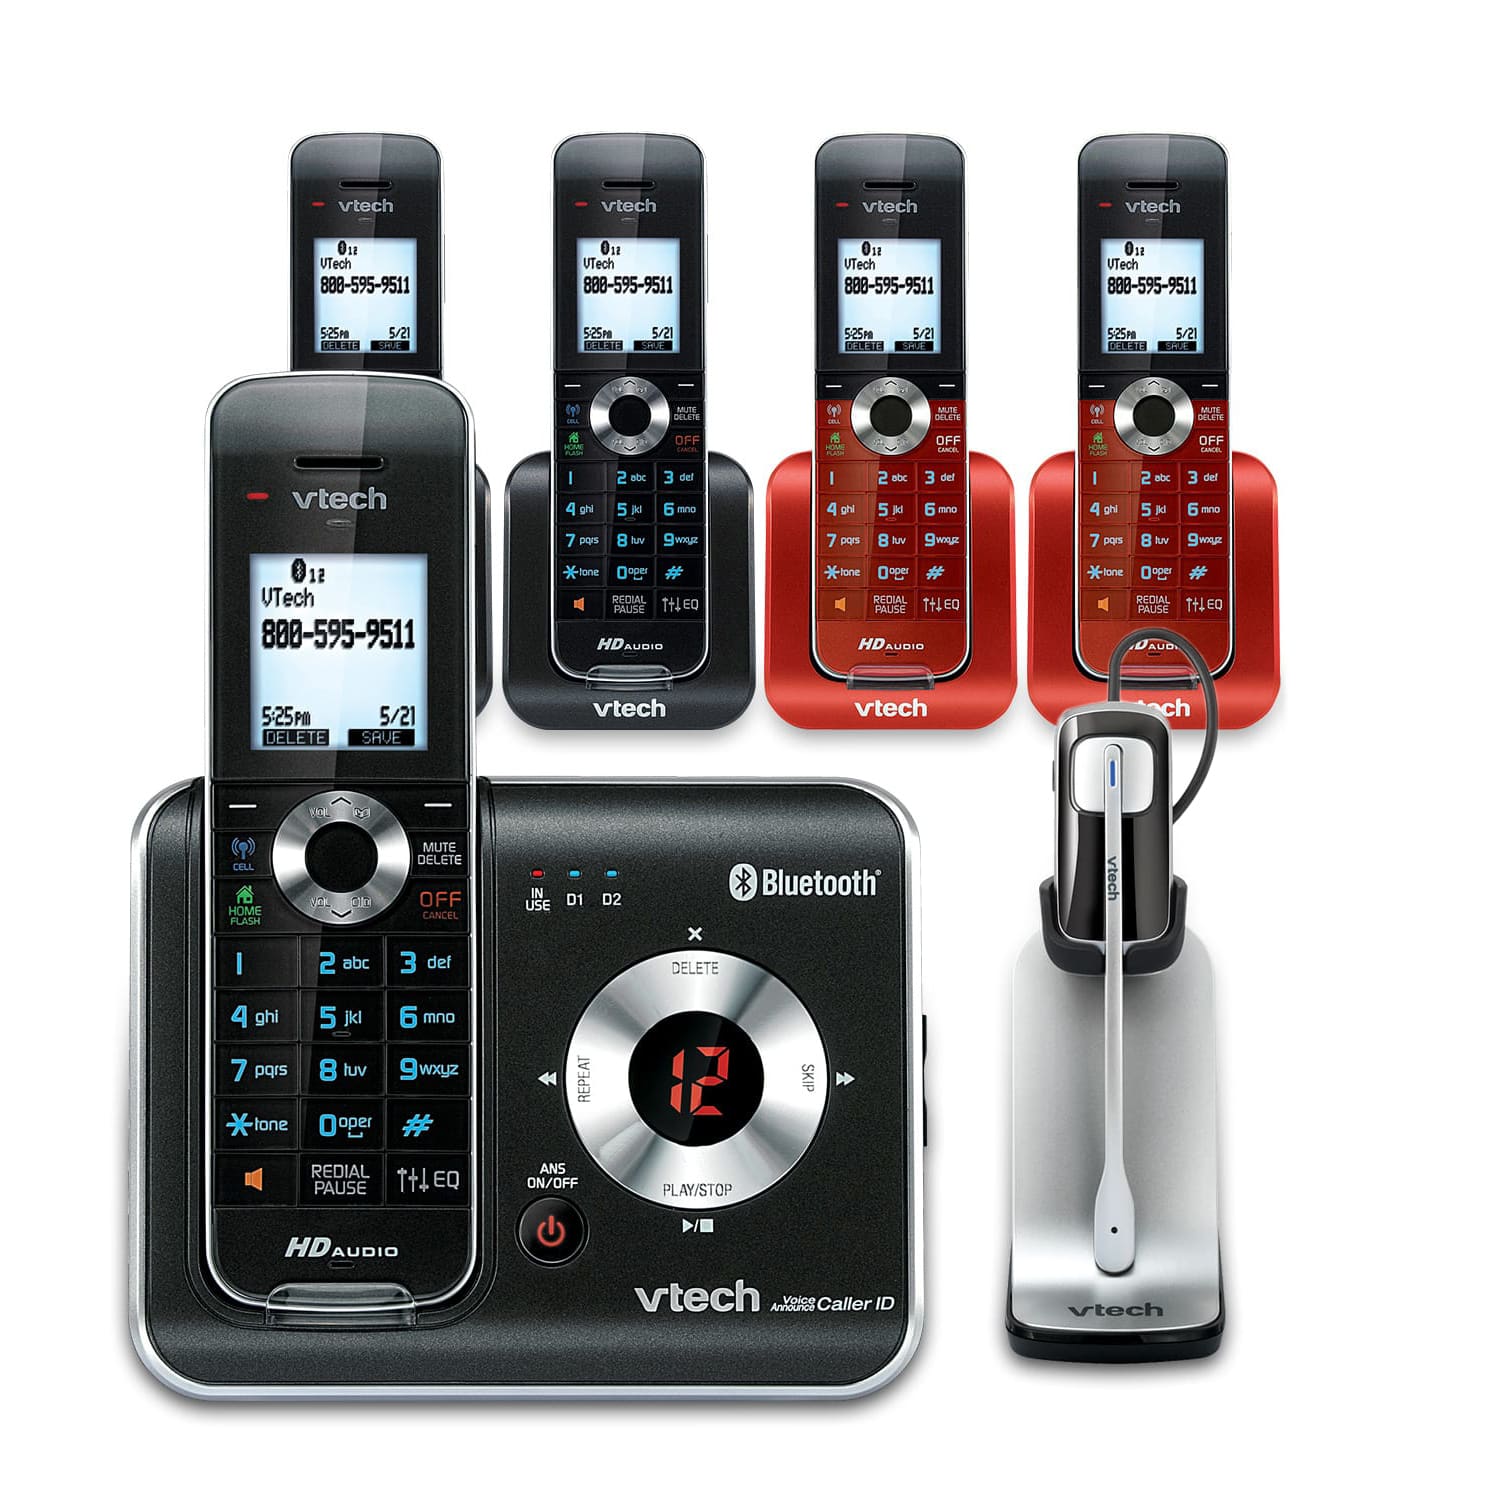 5 Handset Connect to Cell™ Answering System with Caller ID/Call Waiting - view 1